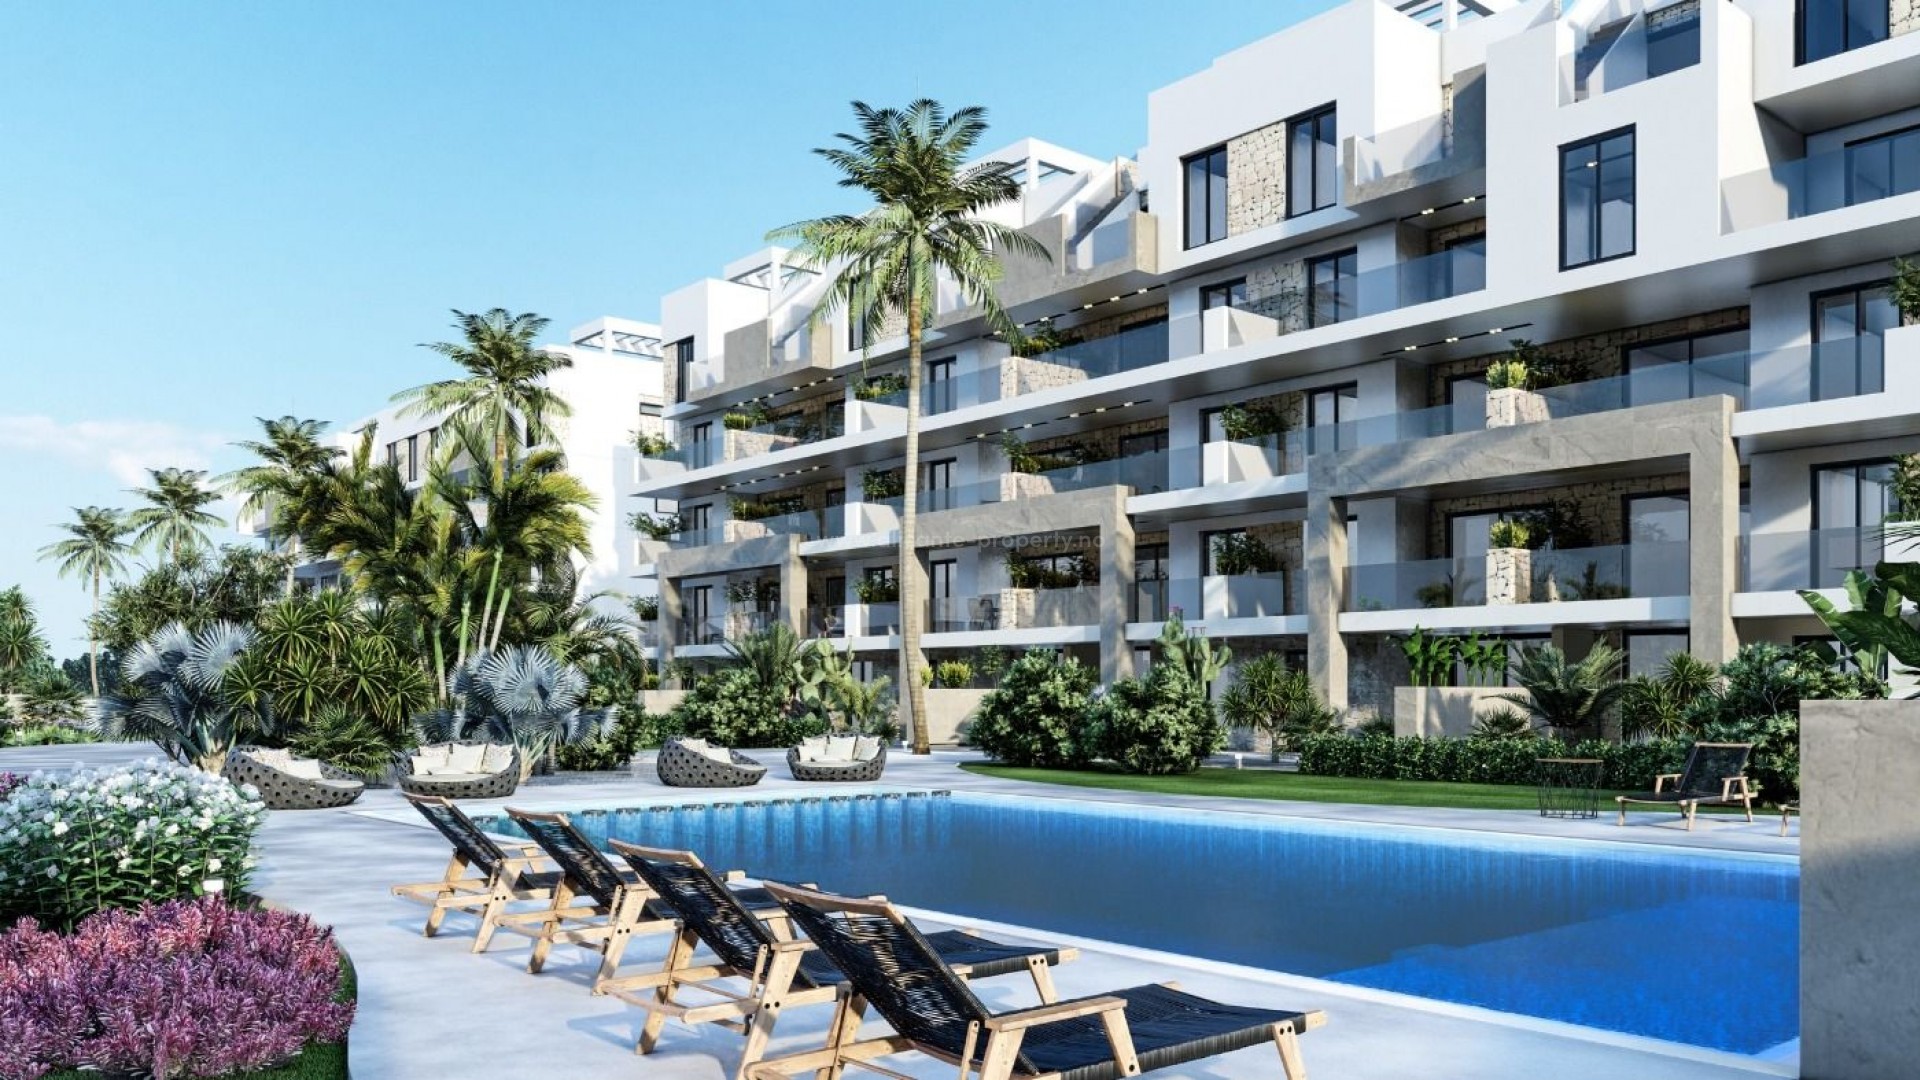 Apartments in residential complex in El Raso, Guardamar del Segura, 2/3 bedrooms, 2 bathrooms, terrace, nature and swimming pools, including gym/spa